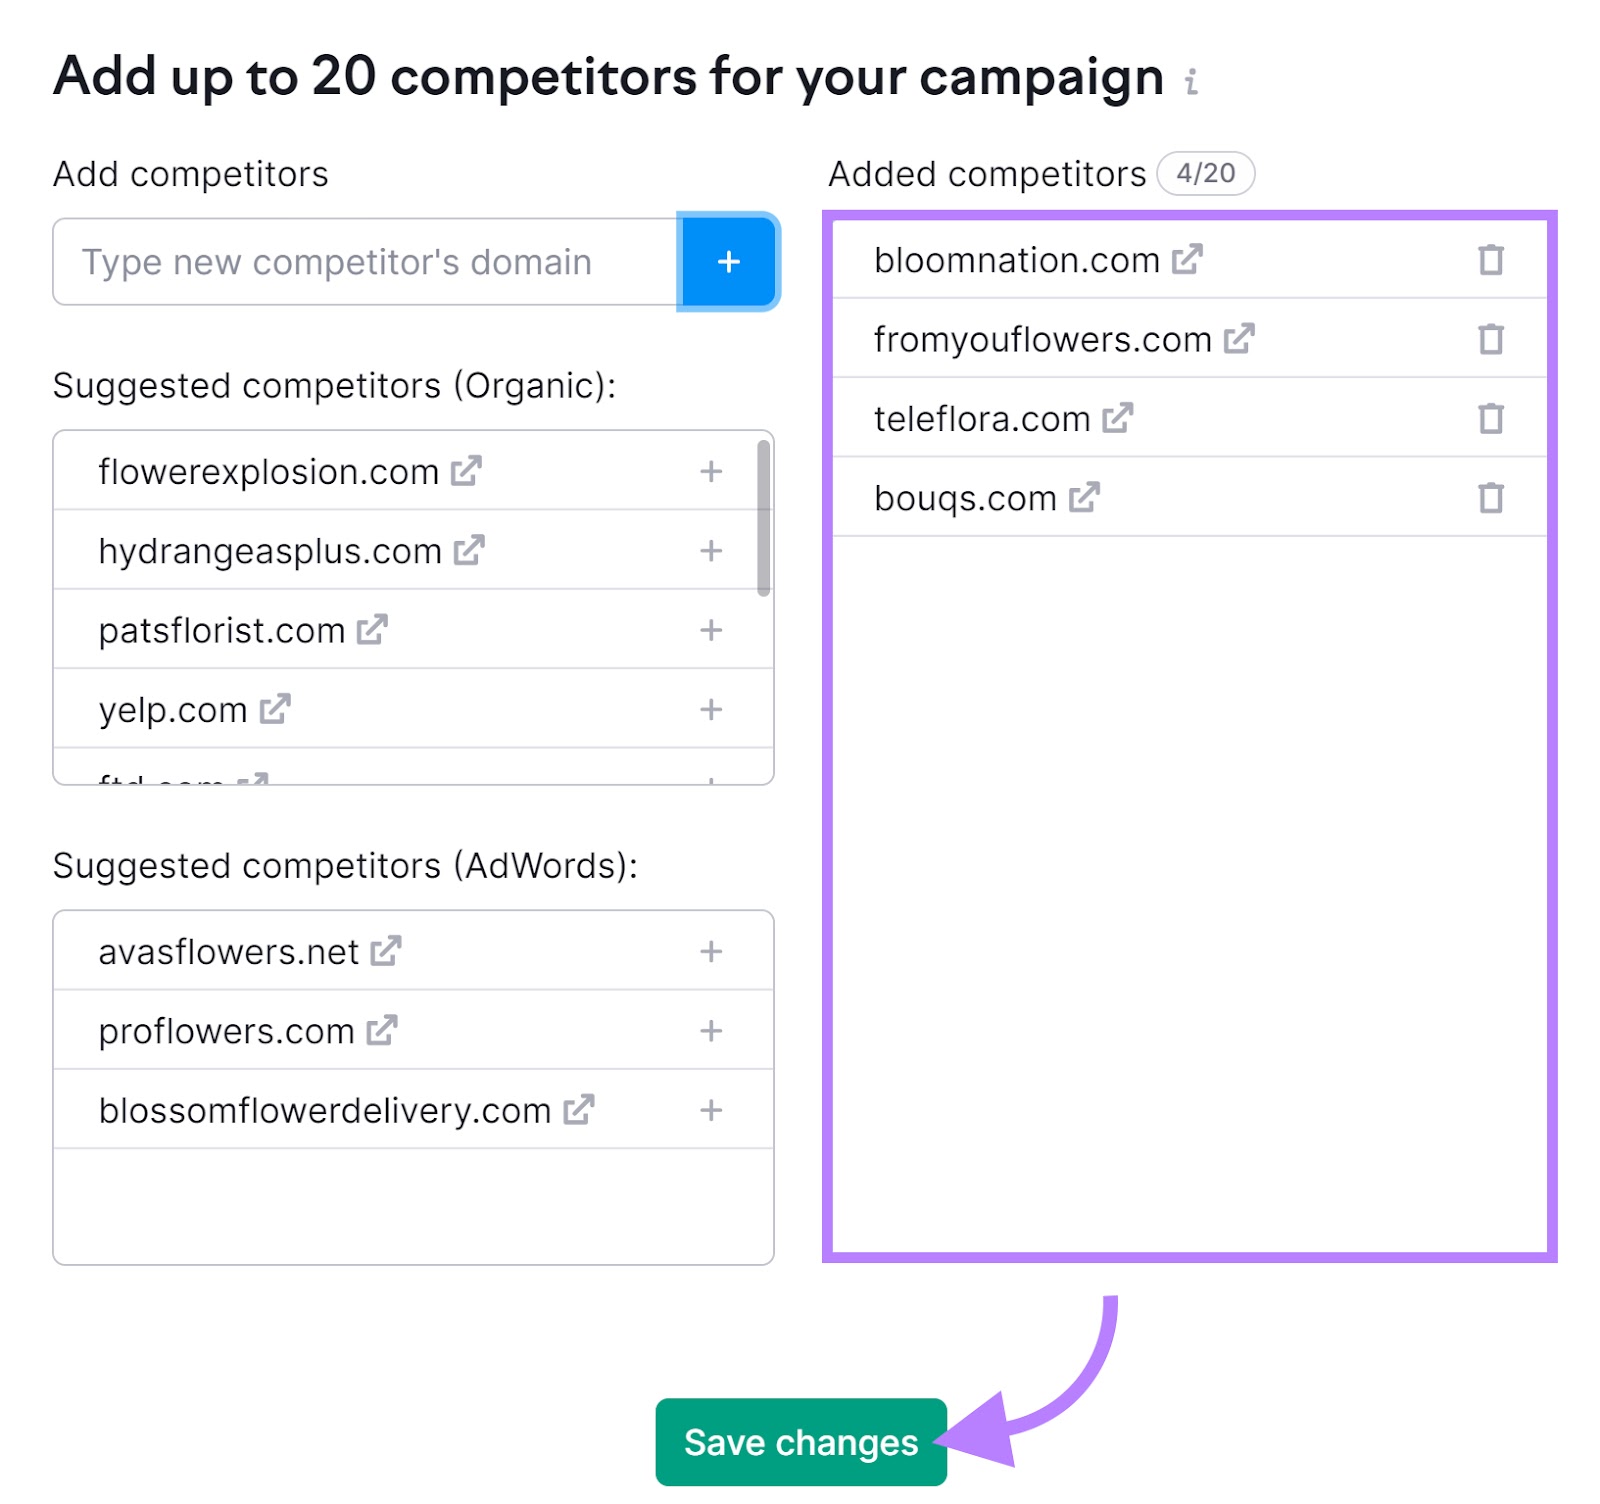 Position Tracking tool showing the "Add up to 20 competitors for your campaign" window.